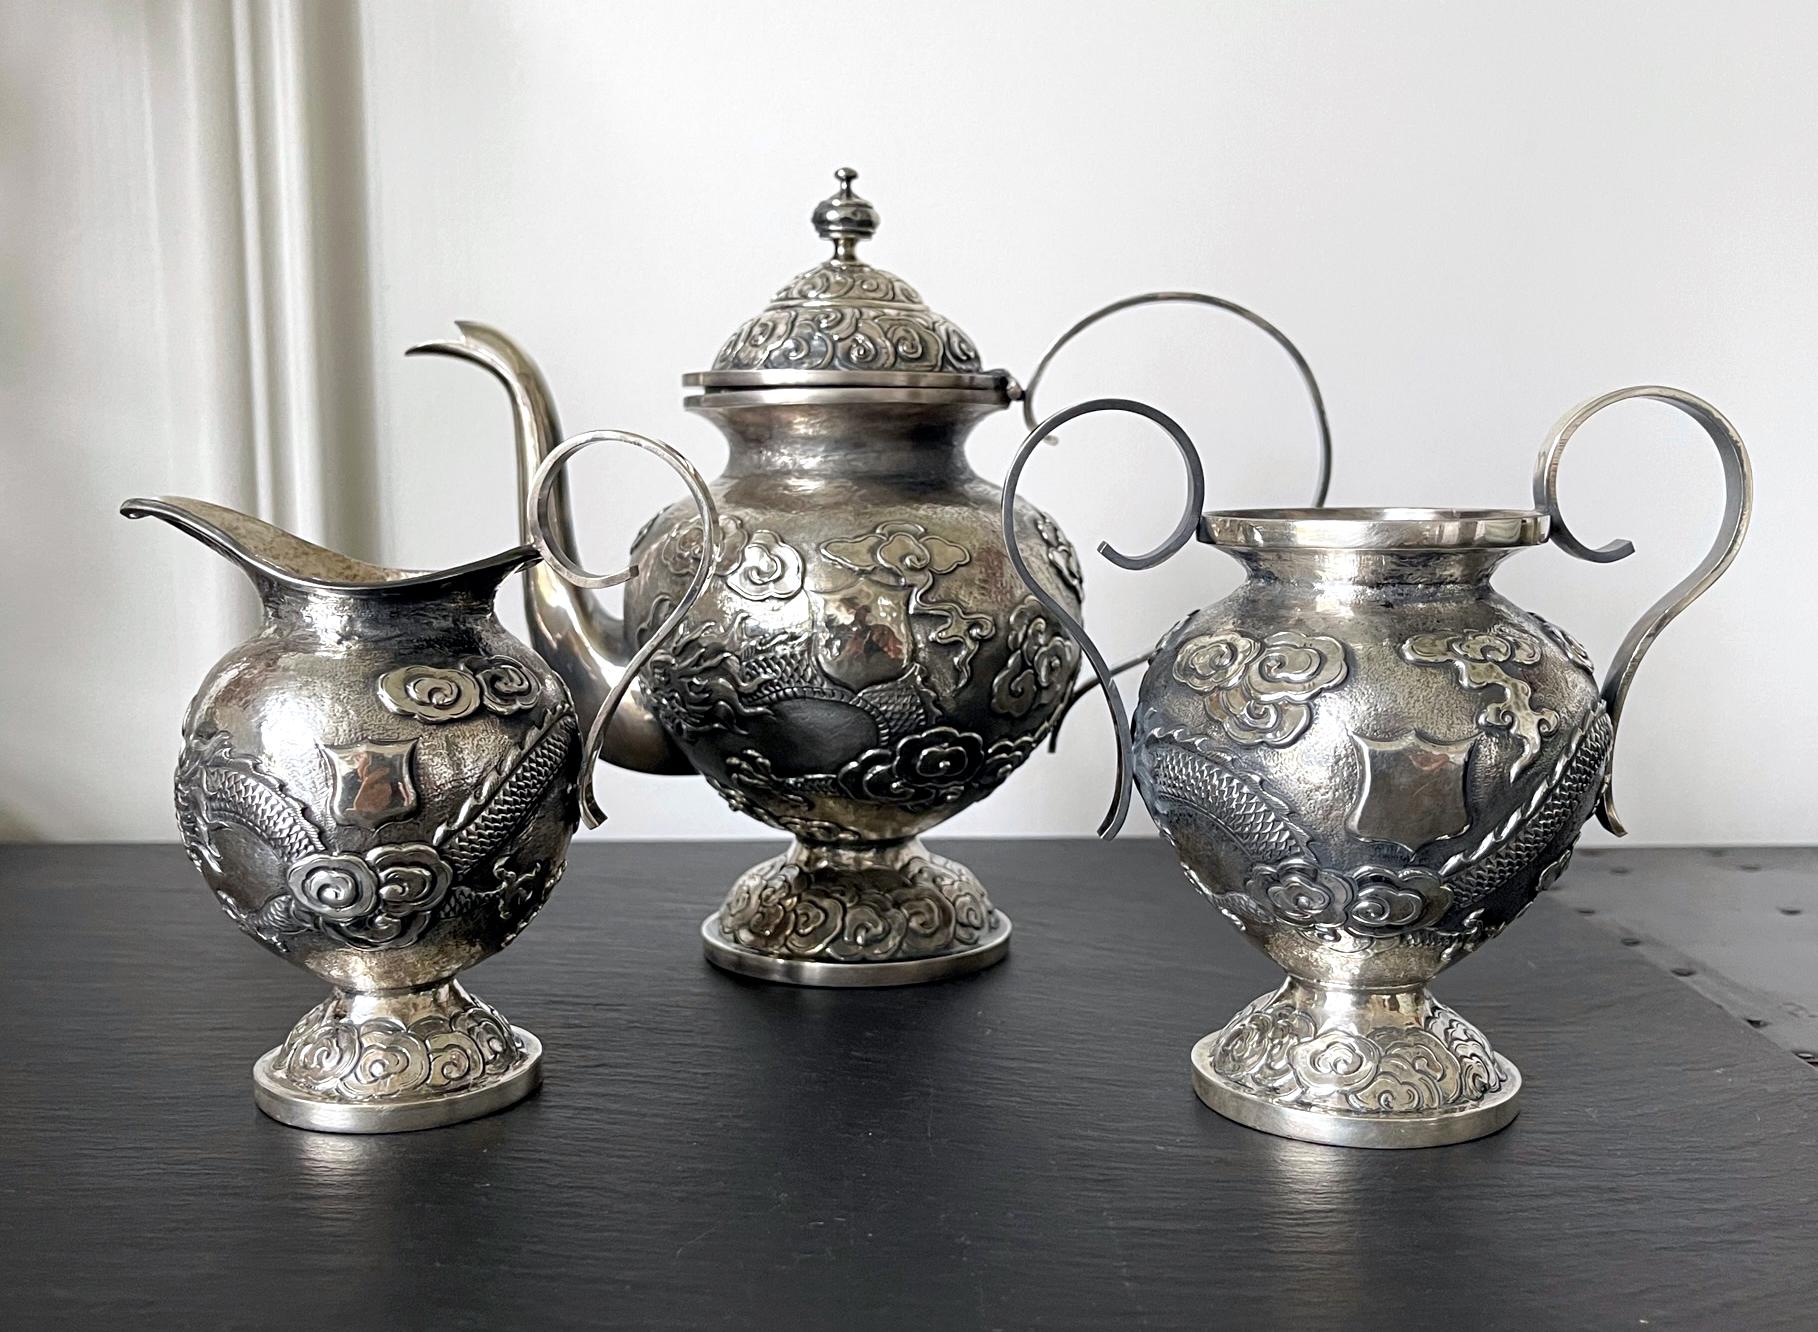 A three-piece set of Chinese export sterling silver tea or coffee service circa early 20th century. The service consists of a lidded tea or coffee pot, a creamer and a sugar bowl. The surface was beautifully decorated with chased high-relief dragons